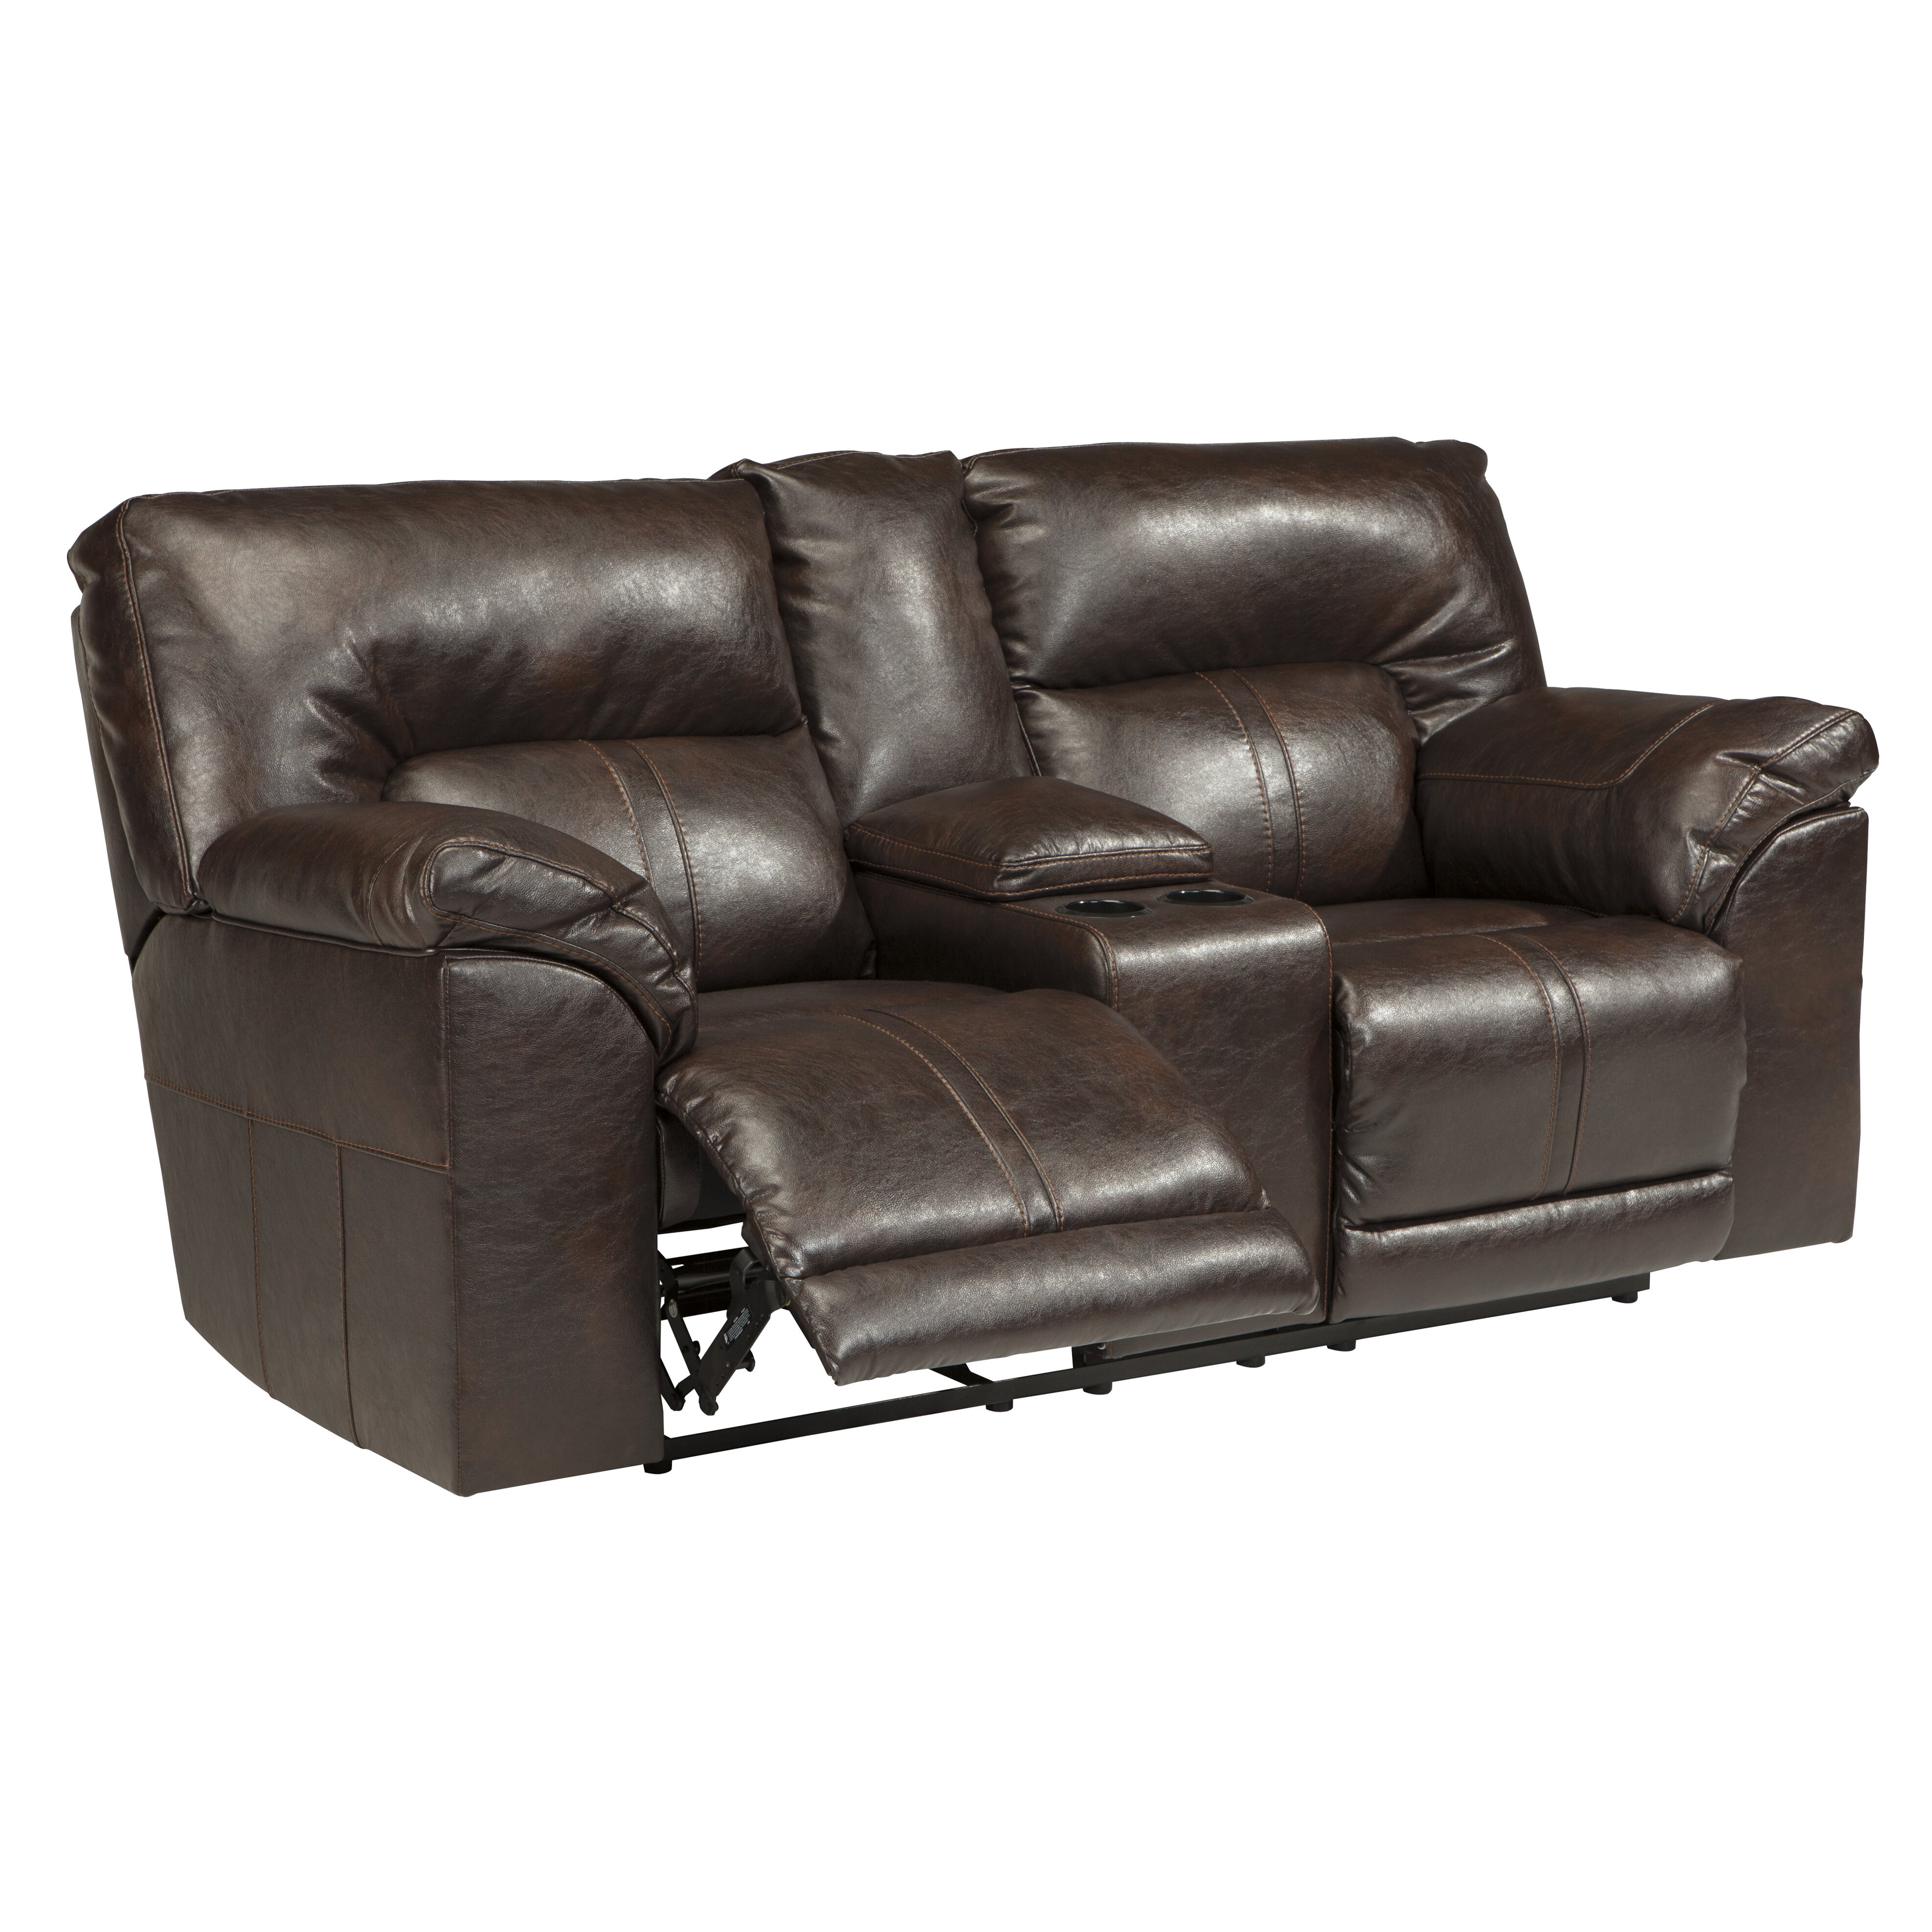 Signature Design by Ashley Double Reclining Console Loveseat u0026 Reviews  Wayfair.ca